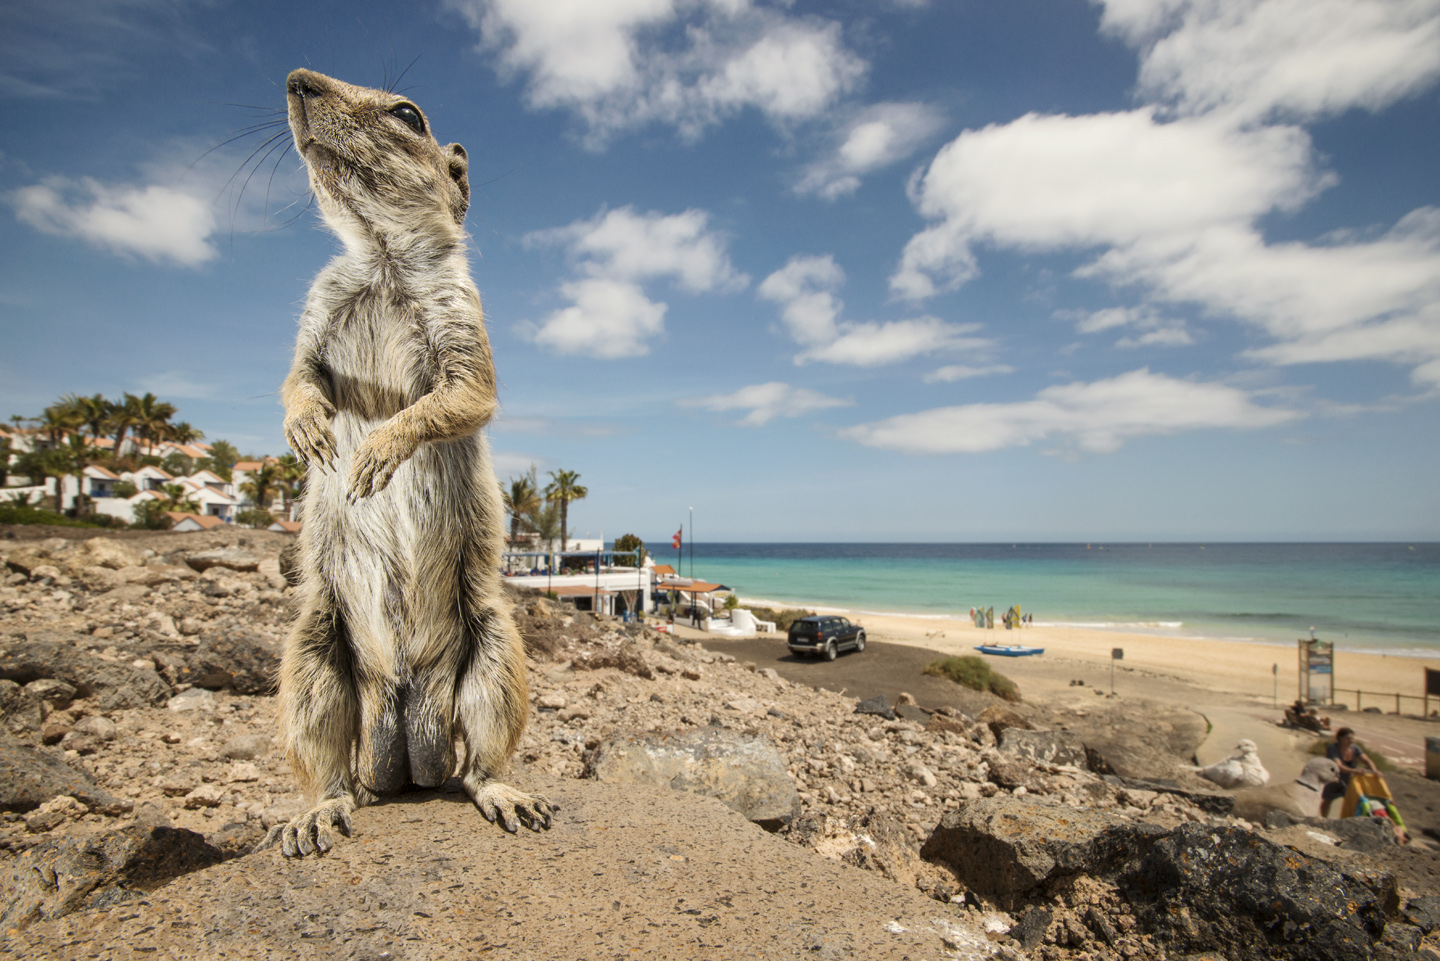  High densities of ground squirrels can be found wherever there are tourists. Beach-side resorts offer the richest pickings 